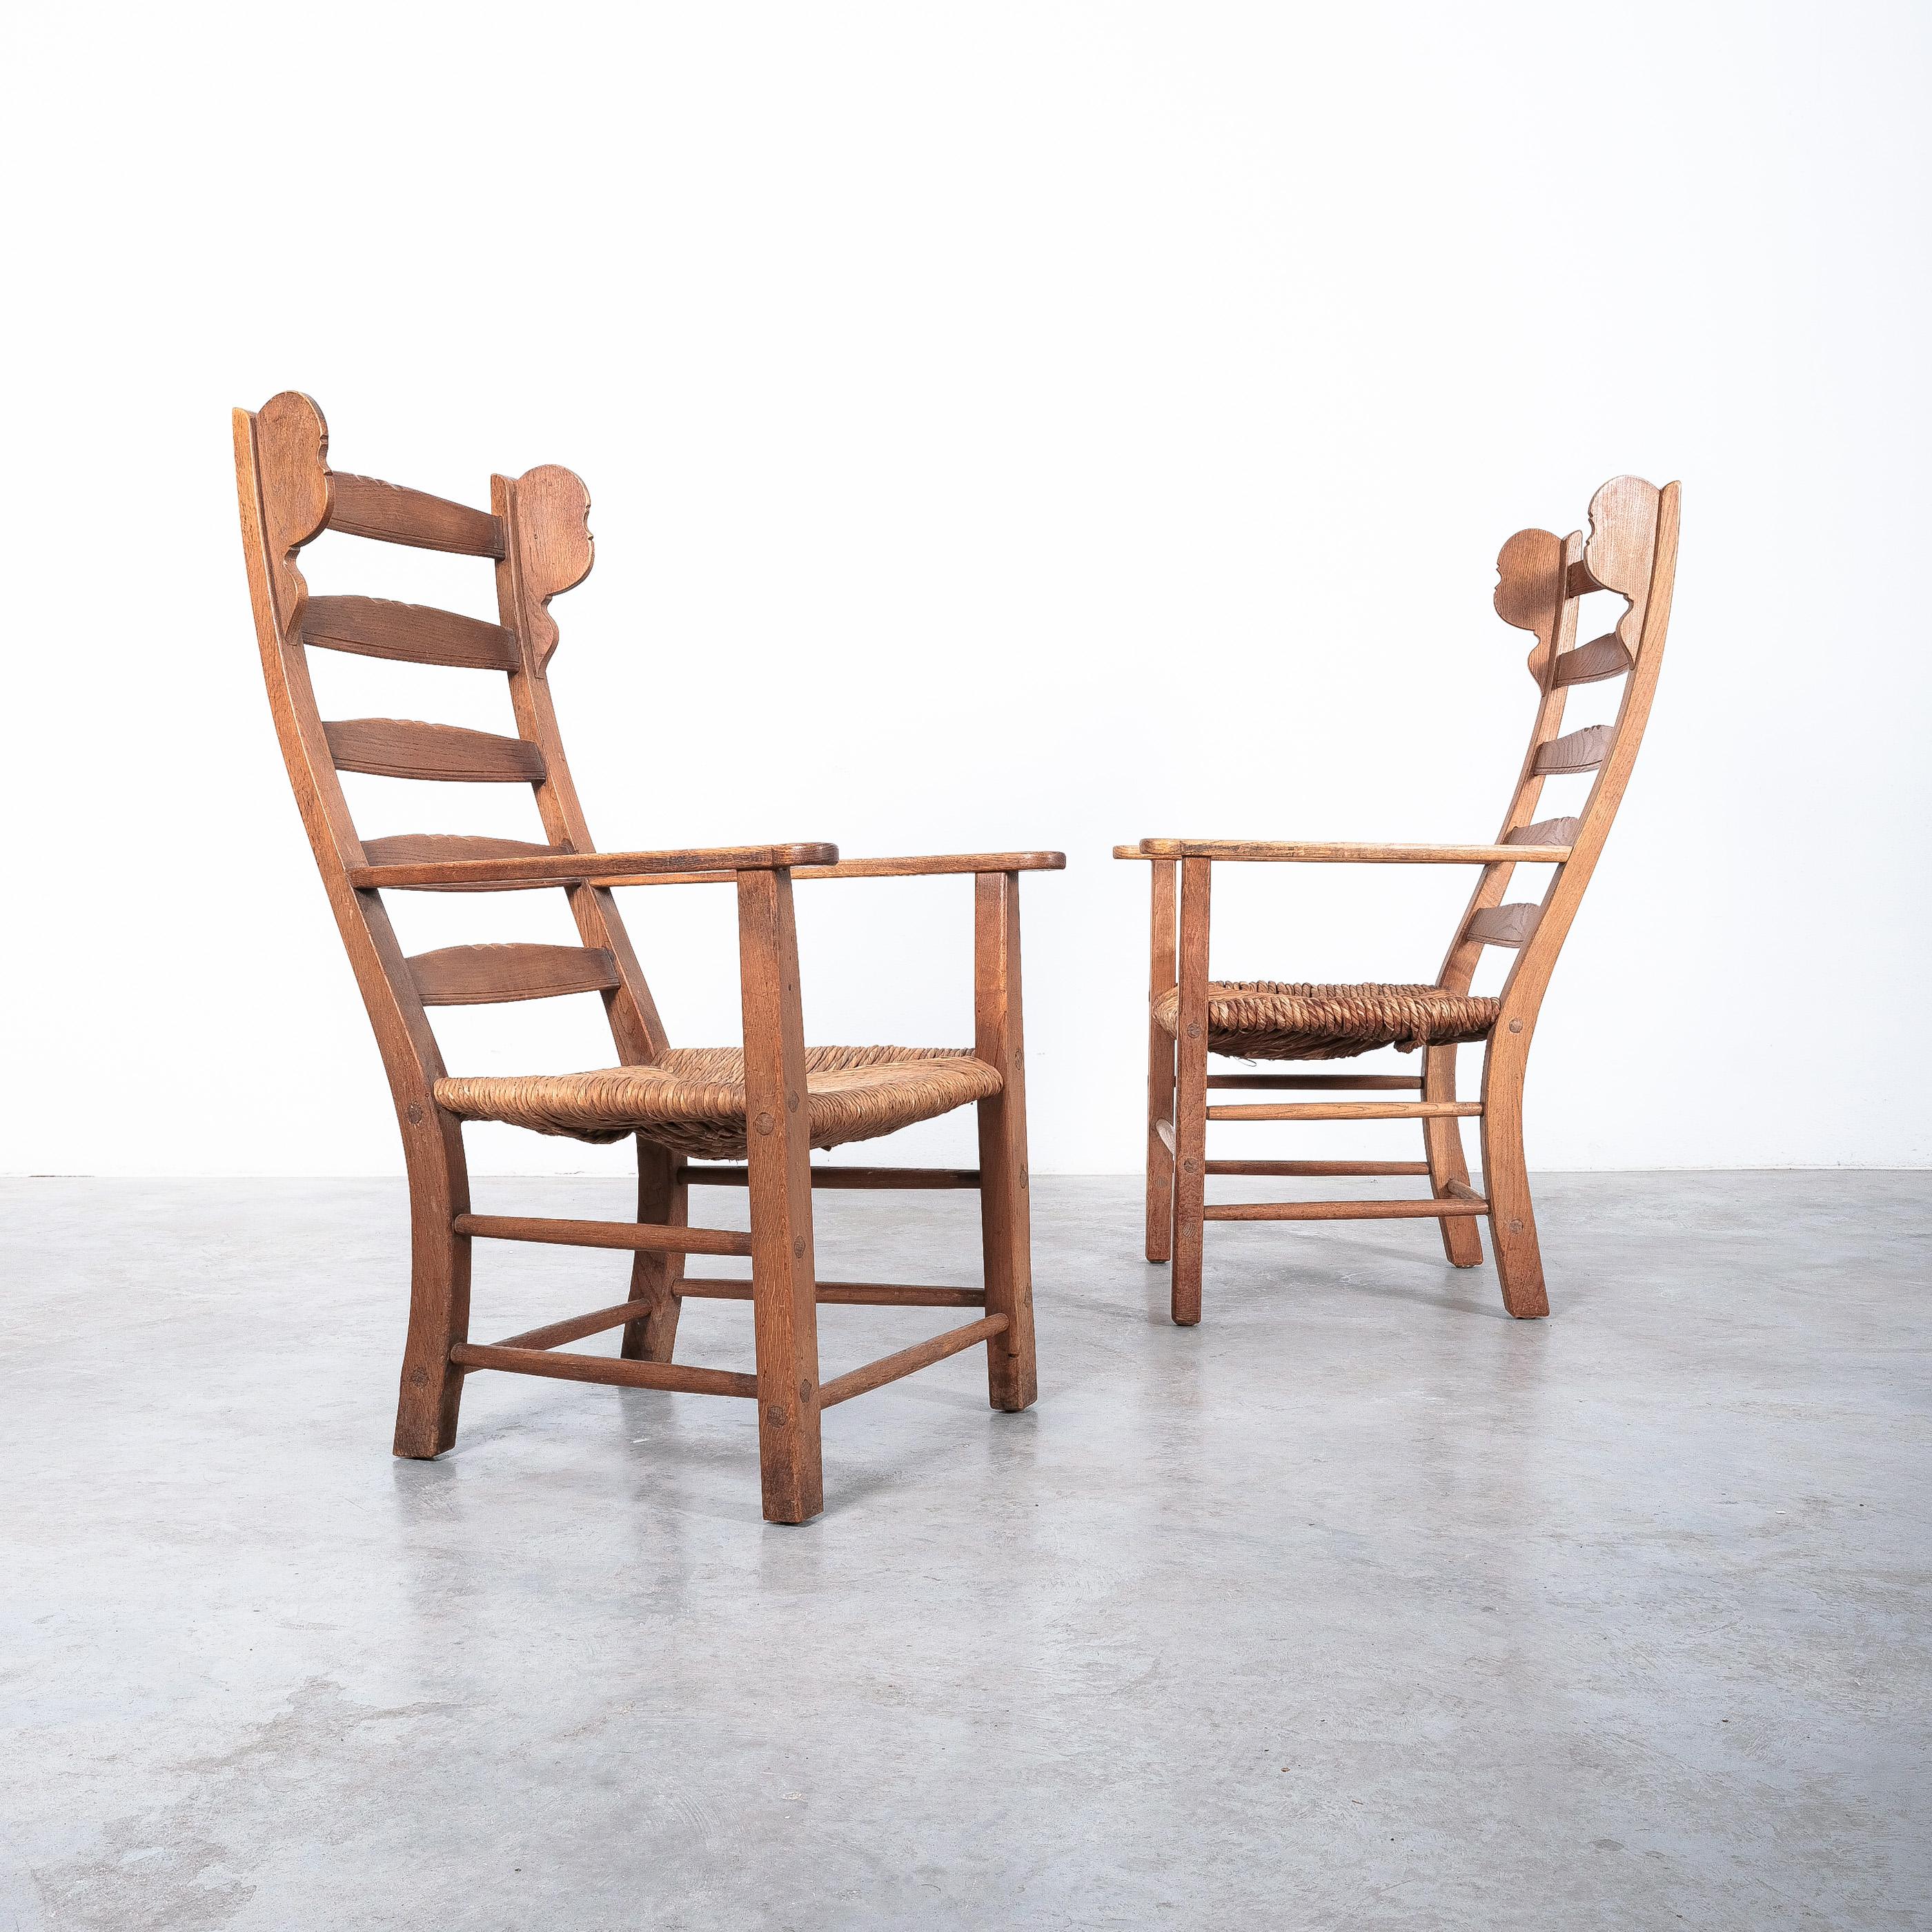 Pair of armchairs, beech, rope hemp, France, 1950s.

Gorgeous set of 2 almost identical arm-chairs, mid-century. One of the chairs is a bit taller and also the seat height differs about half inch. The seats are made of woven hemp rope which also